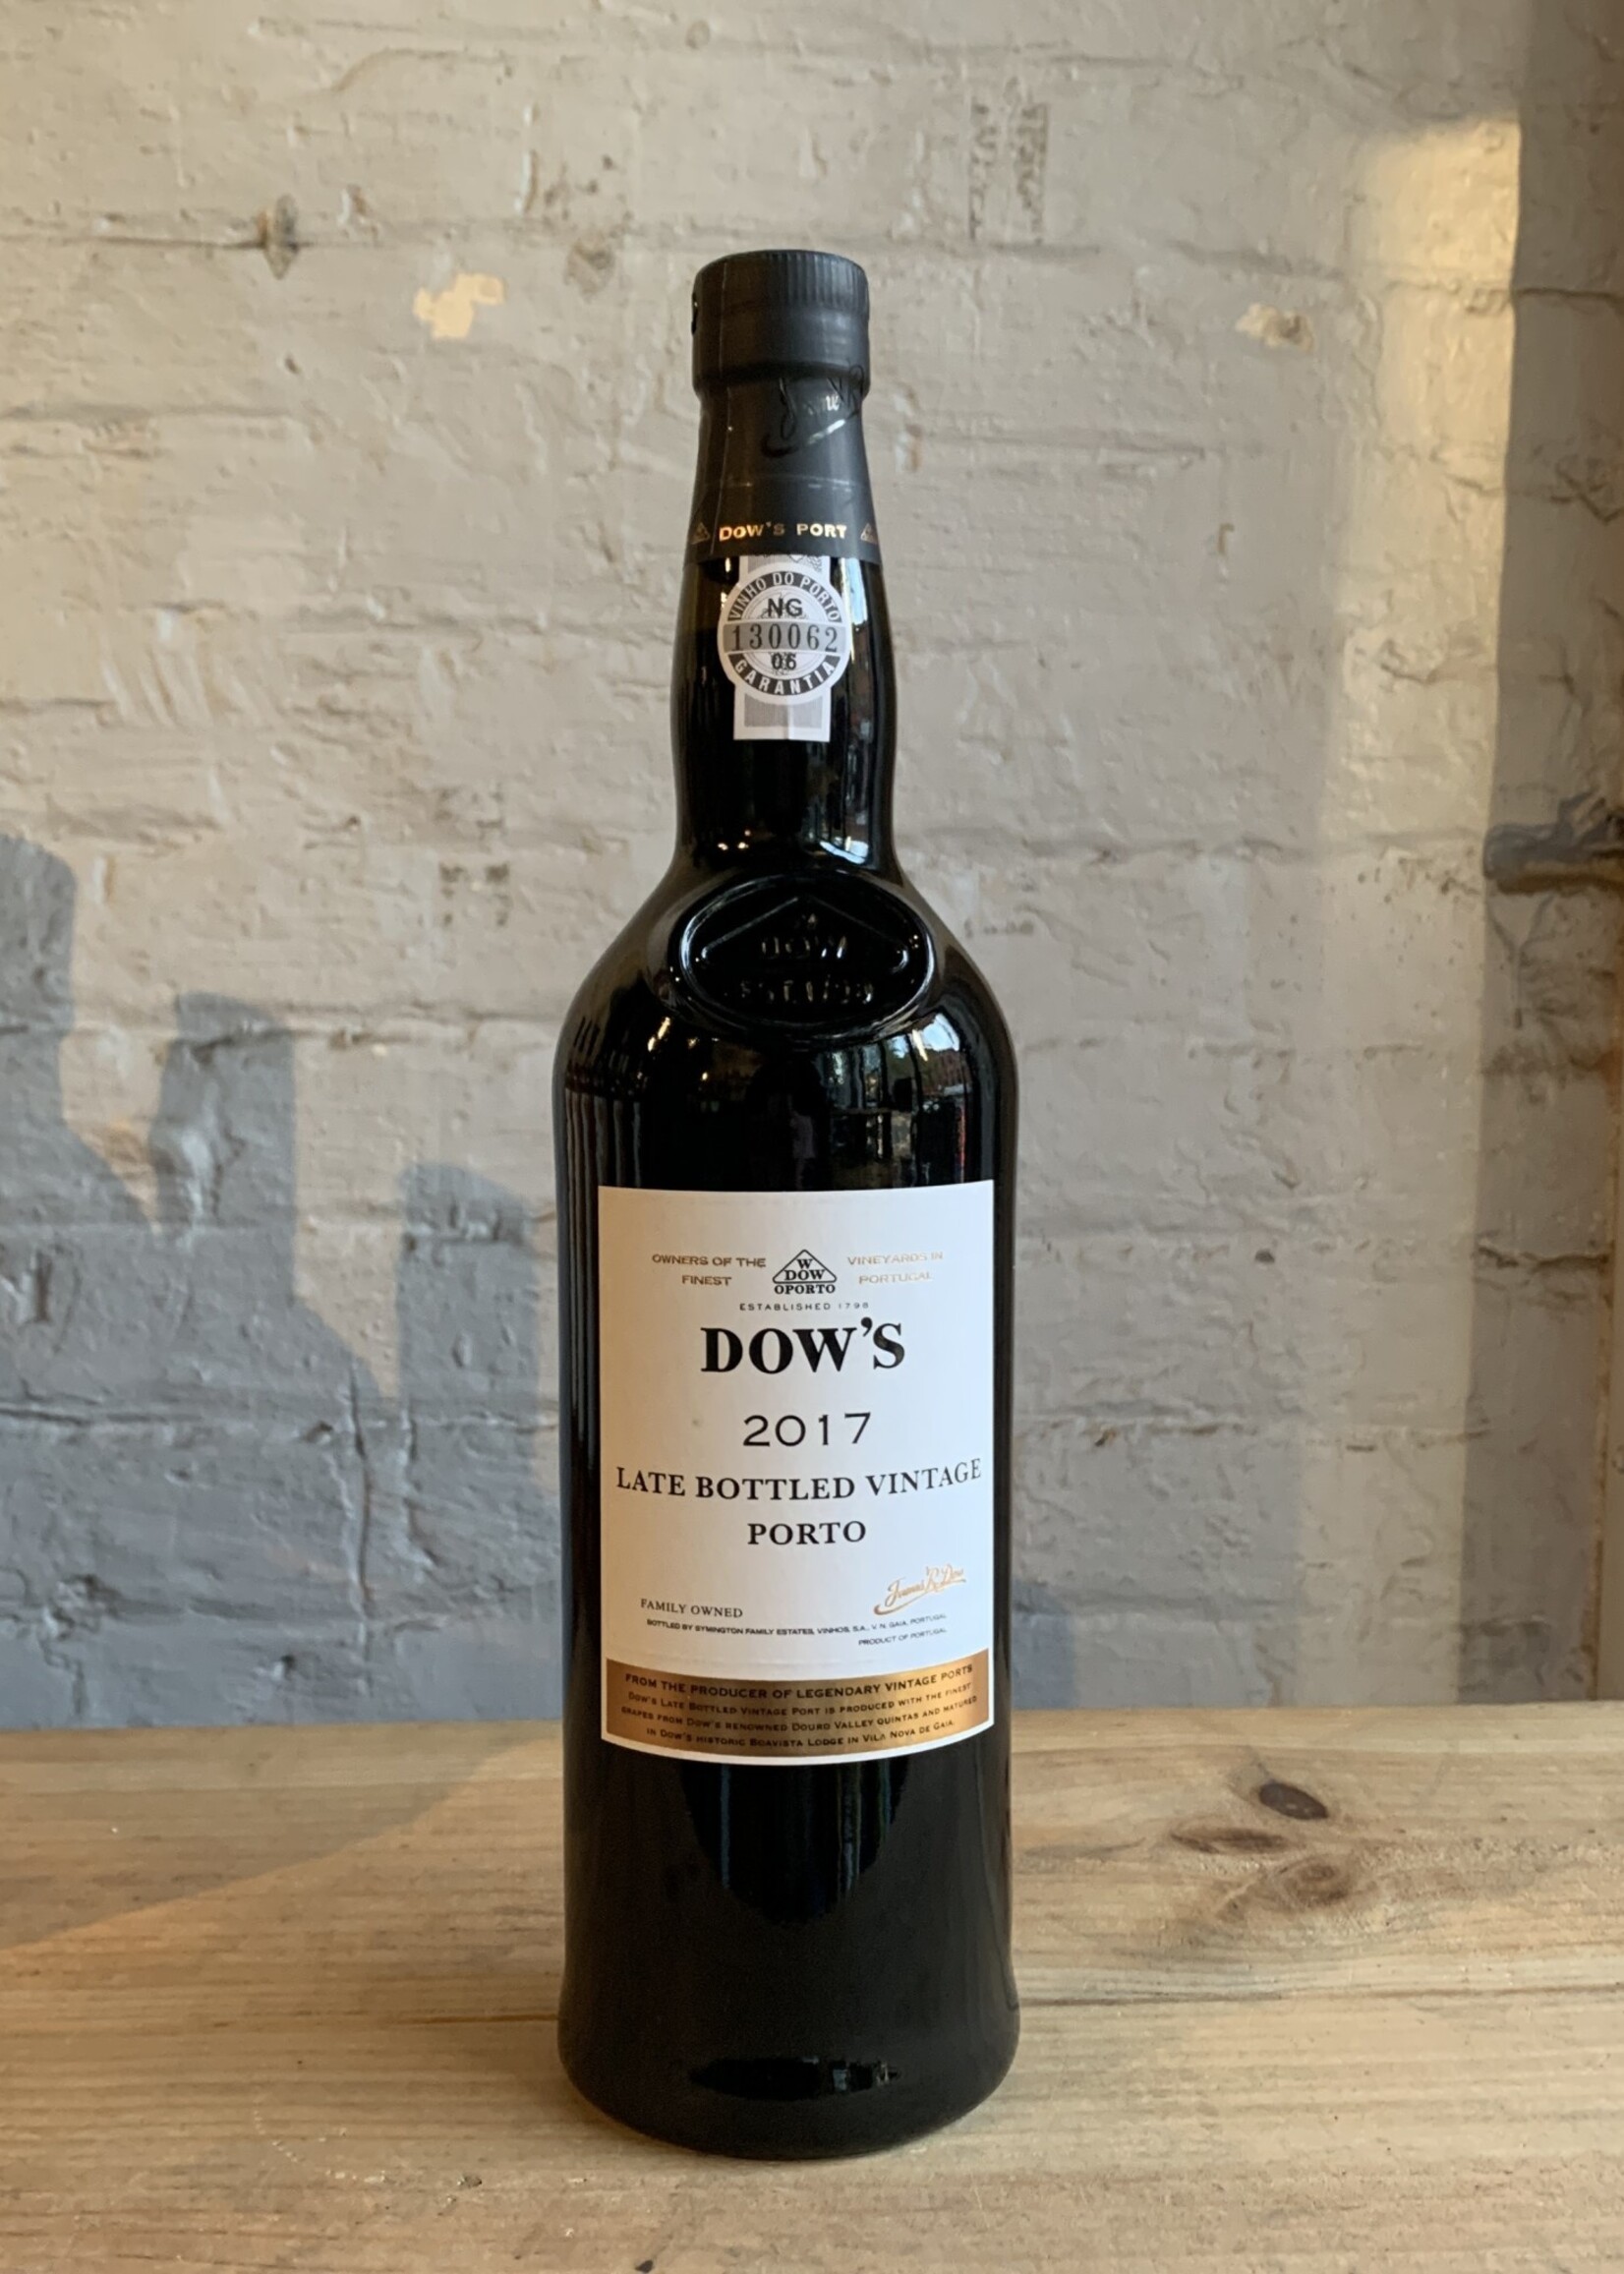 Wine 2017 Dow's Late Bottled Vintage Port - Douro, Portugal (750ml)